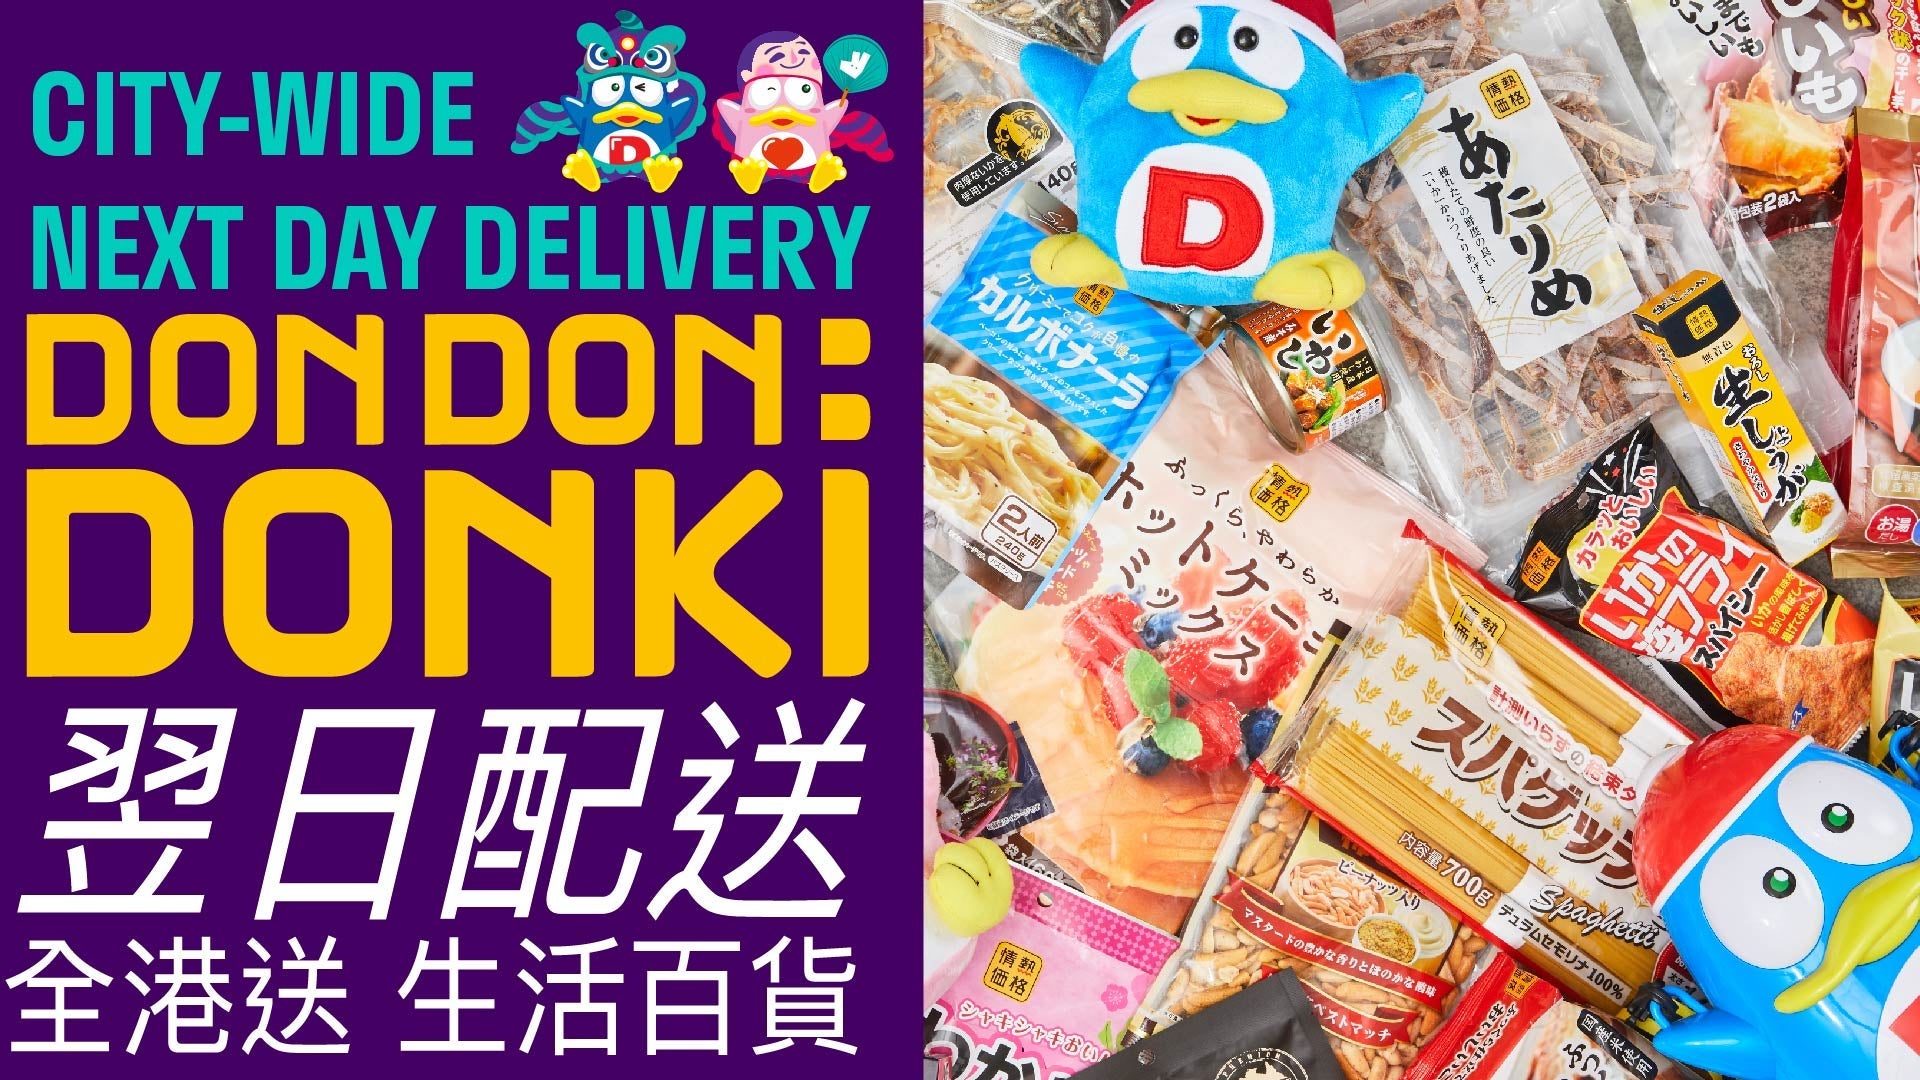 ???? DON DON DONKI NEXT DAY DELIVERY - ADVANCE ORDERS ONLY 生活百貨全港送（非即日配送）  delivery from Tsuen Wan Plaza 荃灣廣場- Order with Deliveroo